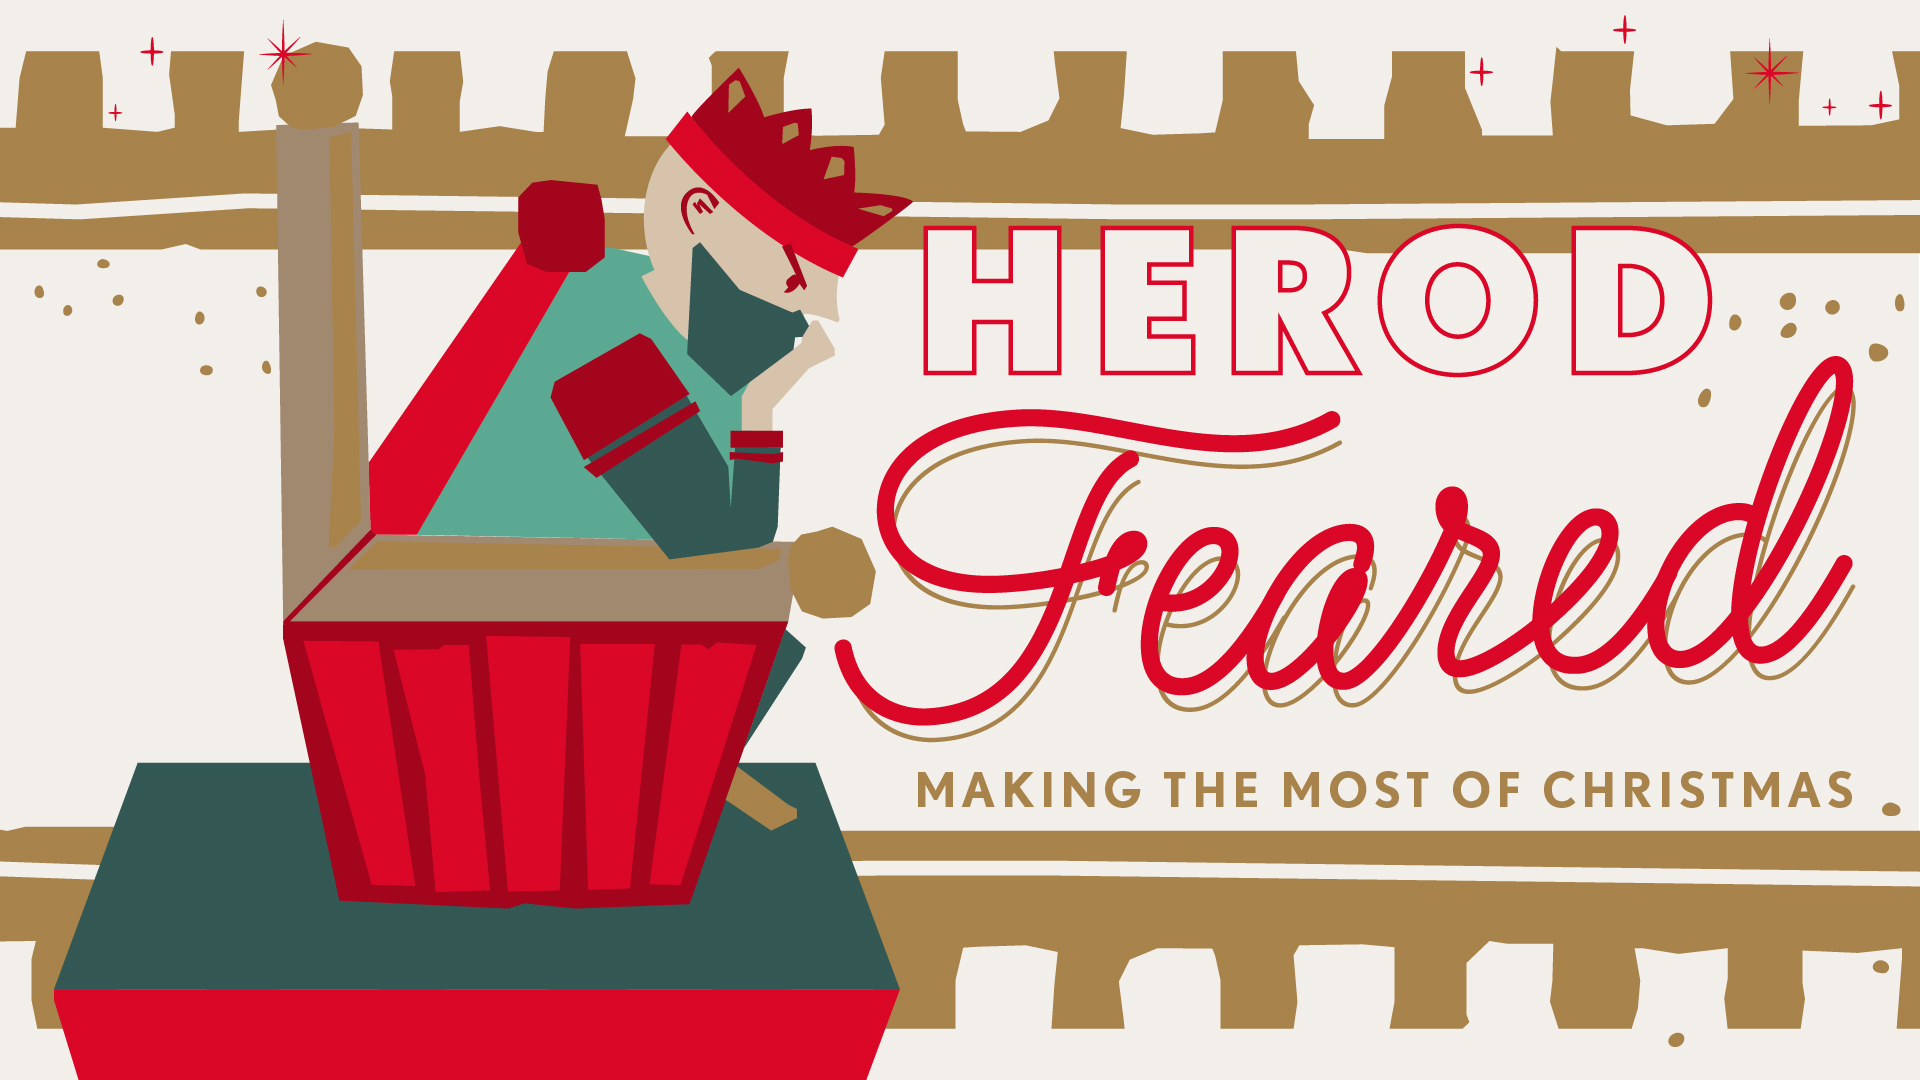 11:00 – King Herod – Fearful – The world stands against Christmas